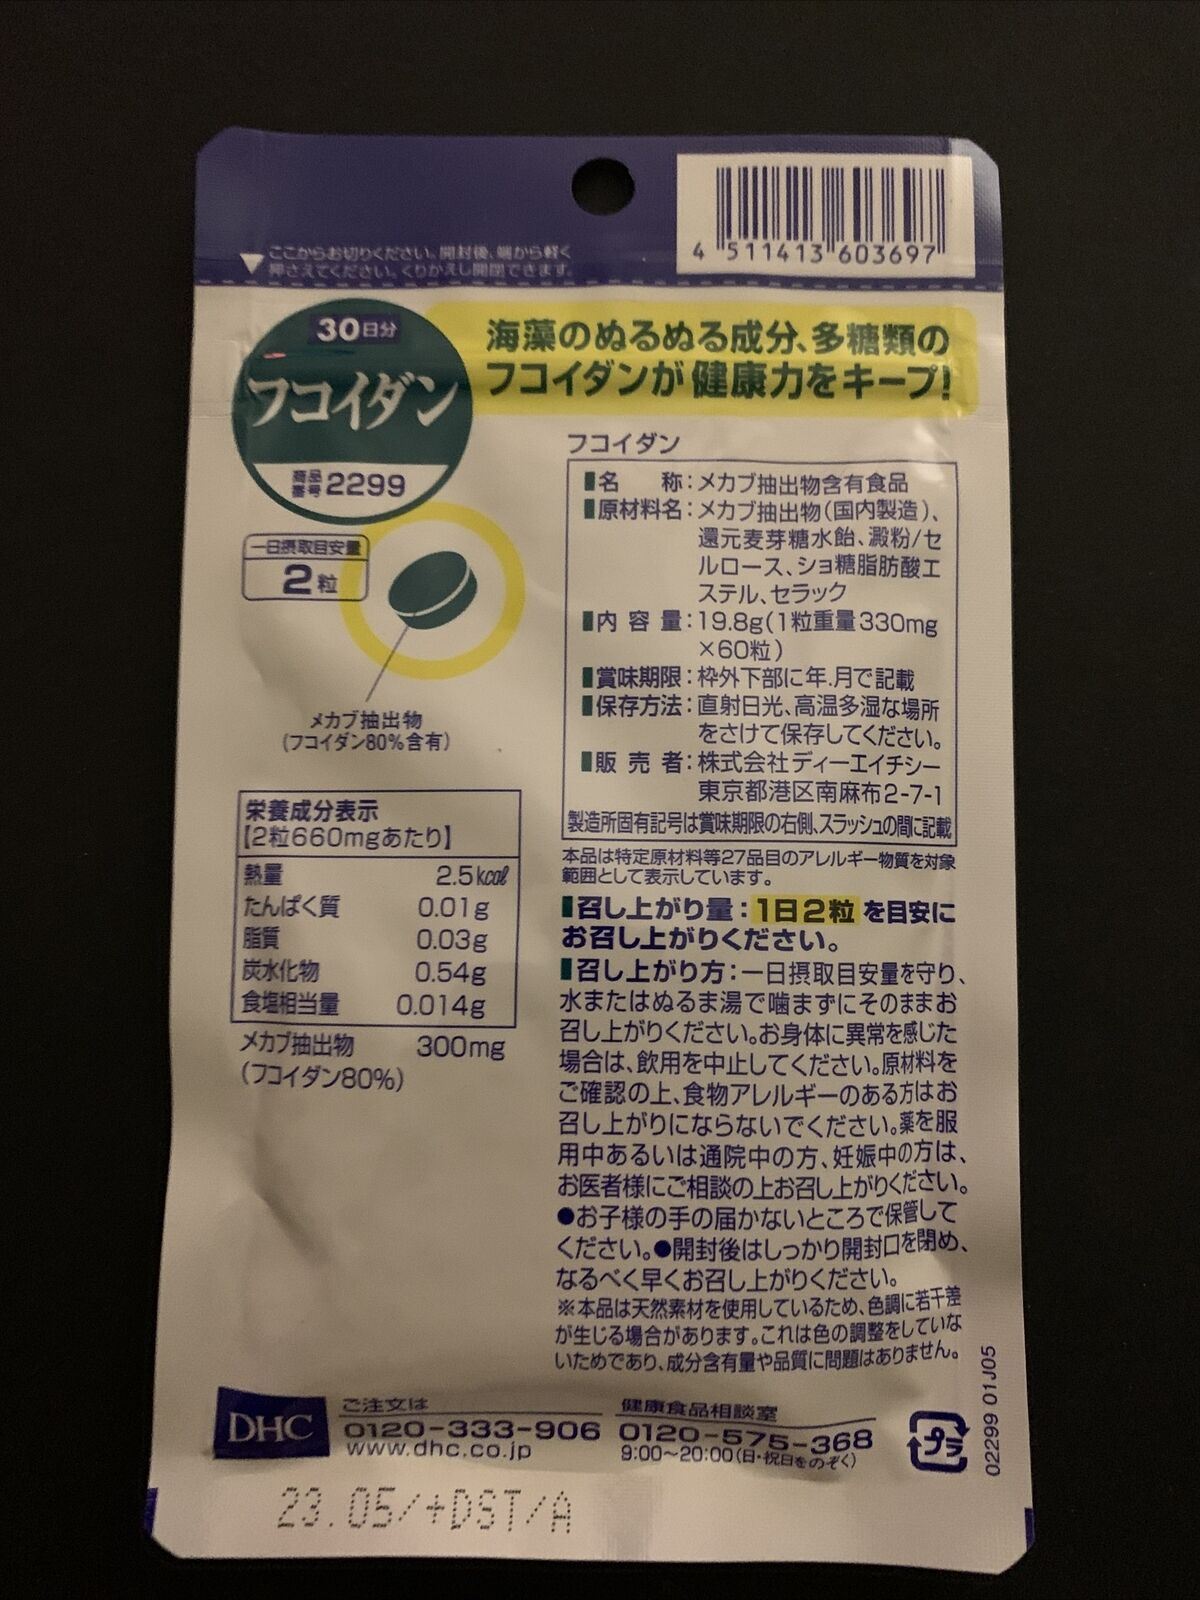 DHC Fucoidan 300mg Supplement 30 Tablets Seaweed Extract - Made in Japan